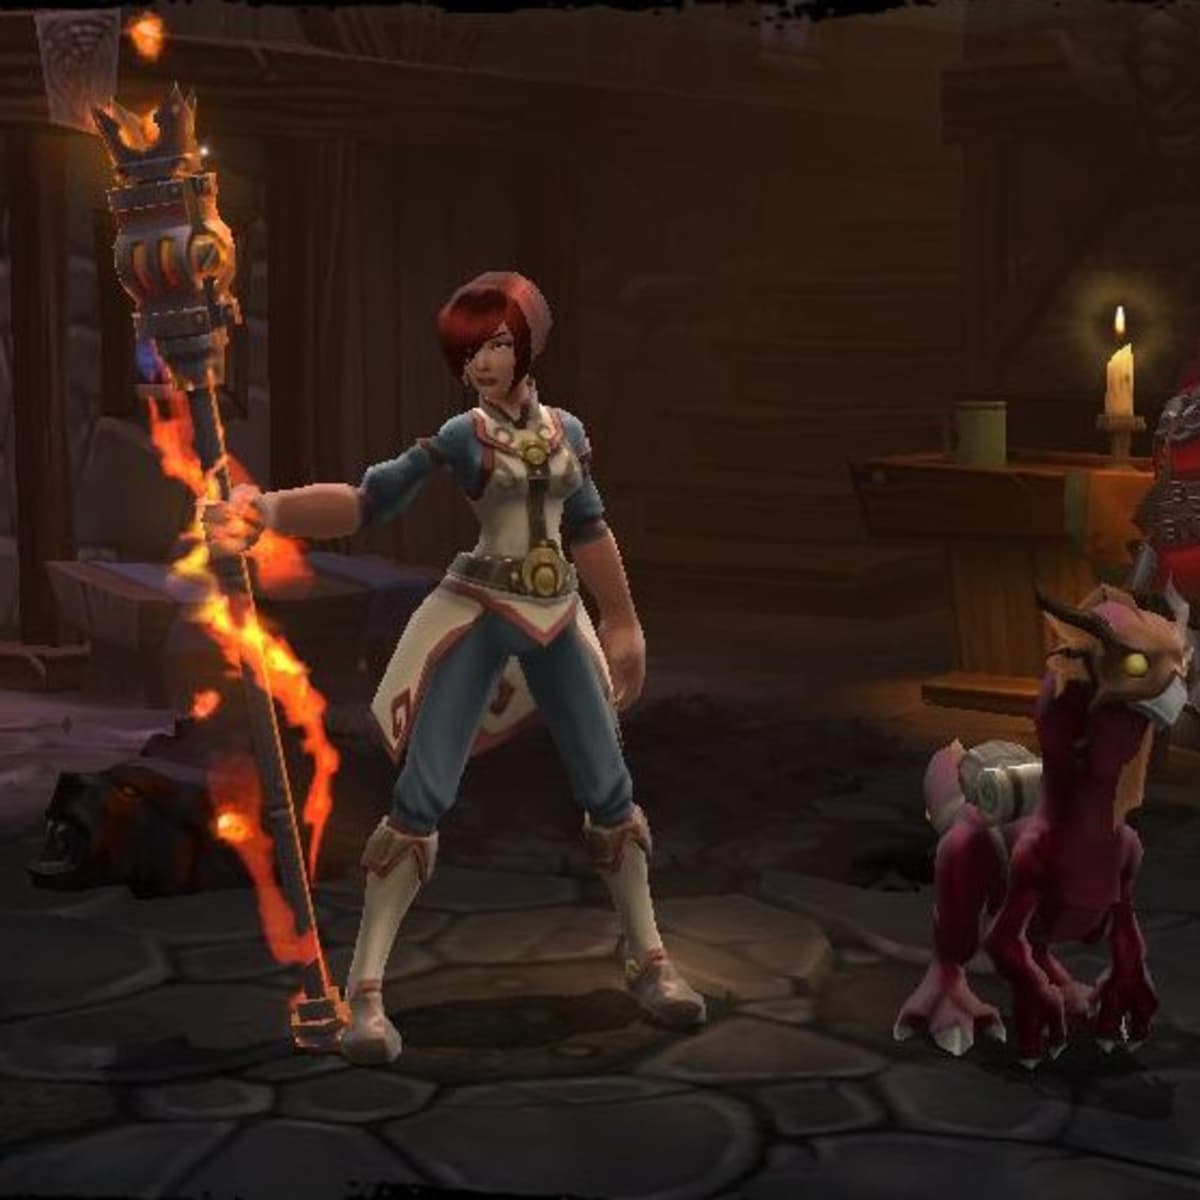 torchlight 2 builds embermage